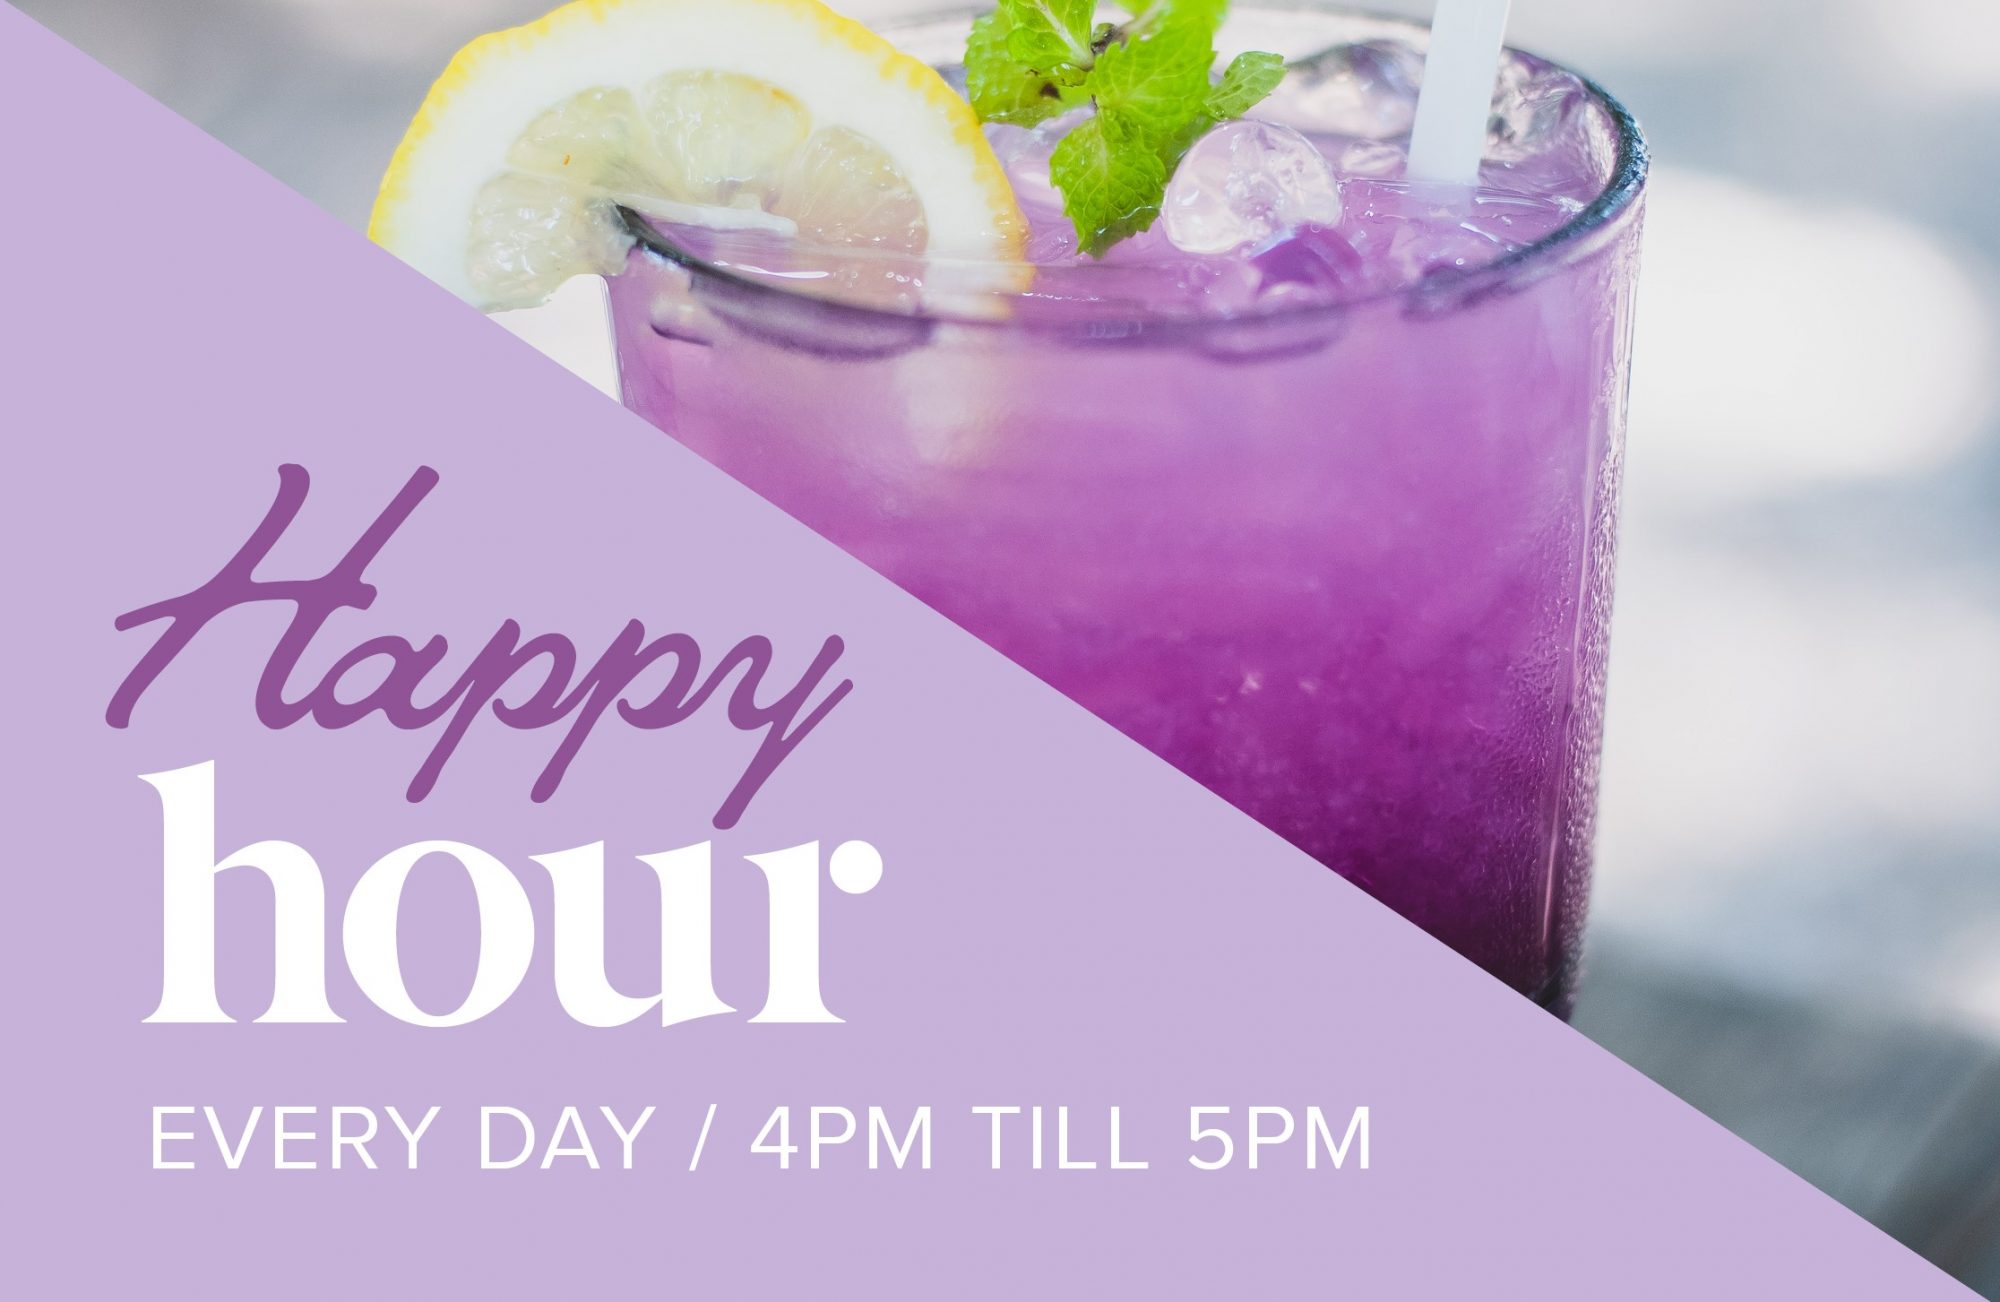 Happy Hour at the Karratha International Hotel is every day from 4pm until 5pm